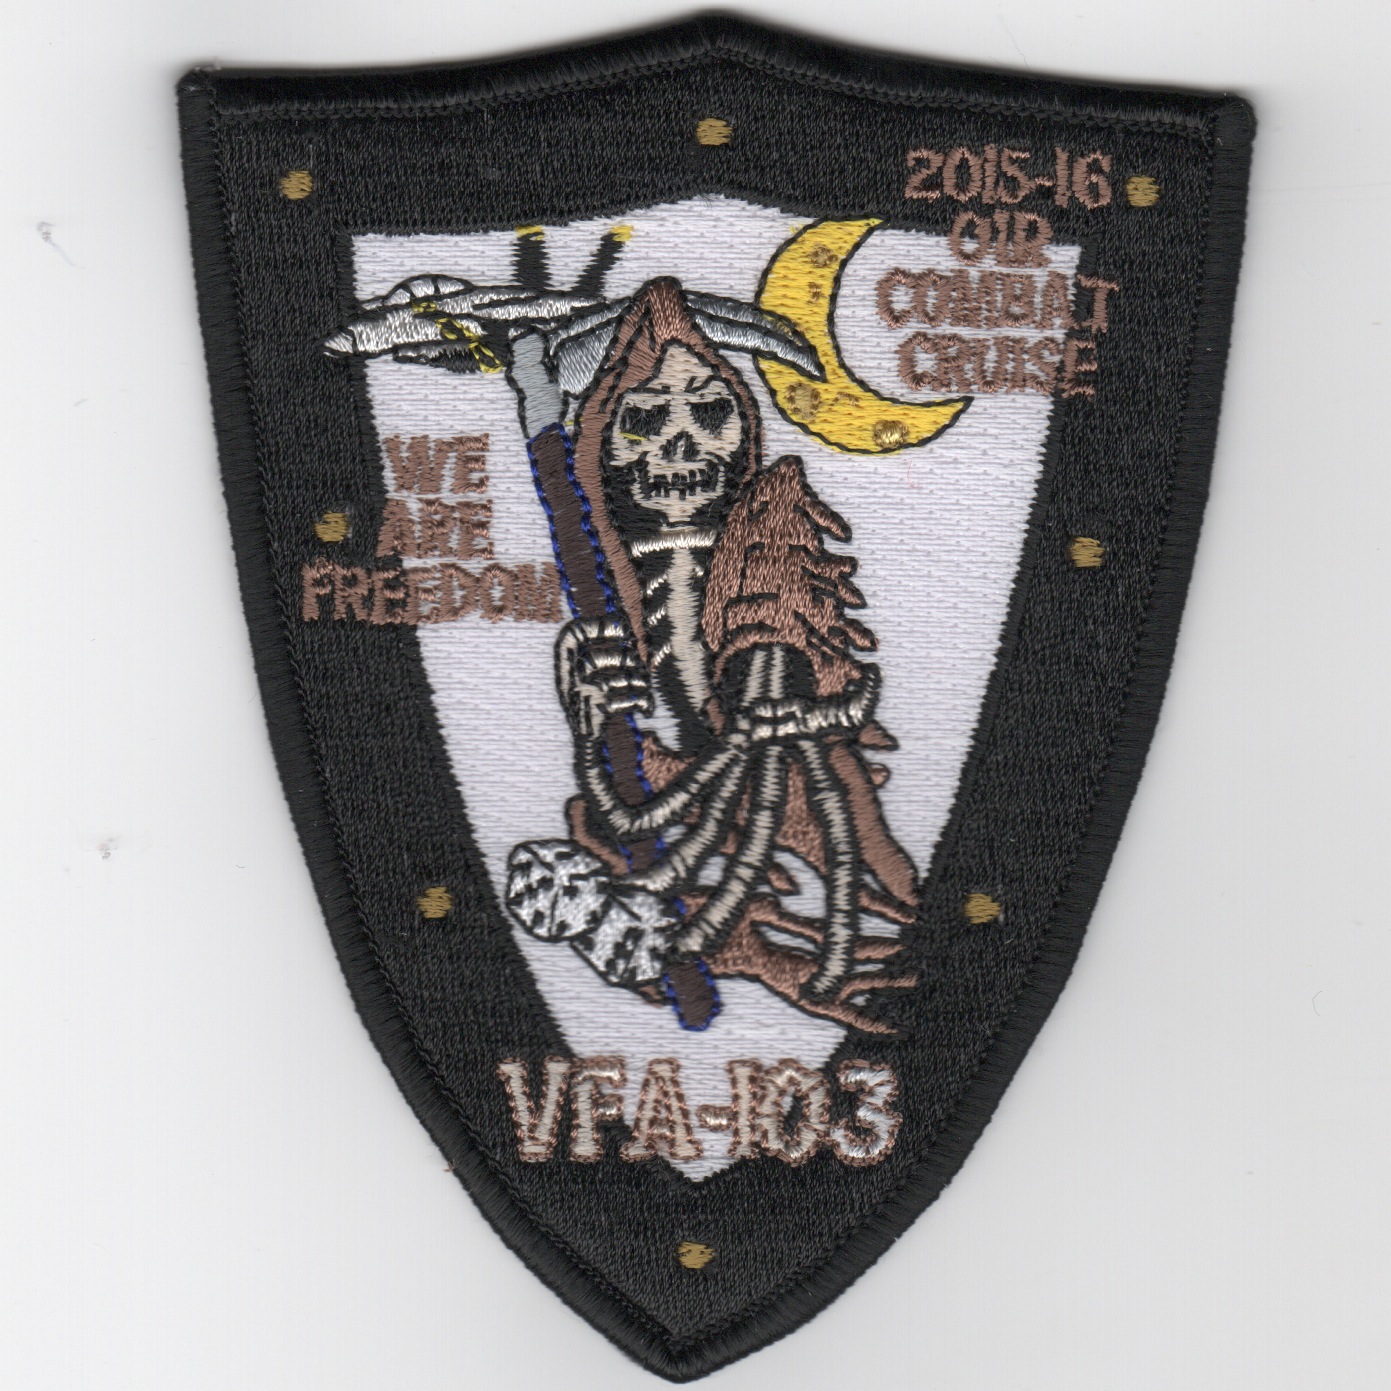 VFA-103 2015-16 'OIF Combat Cruise' Patch